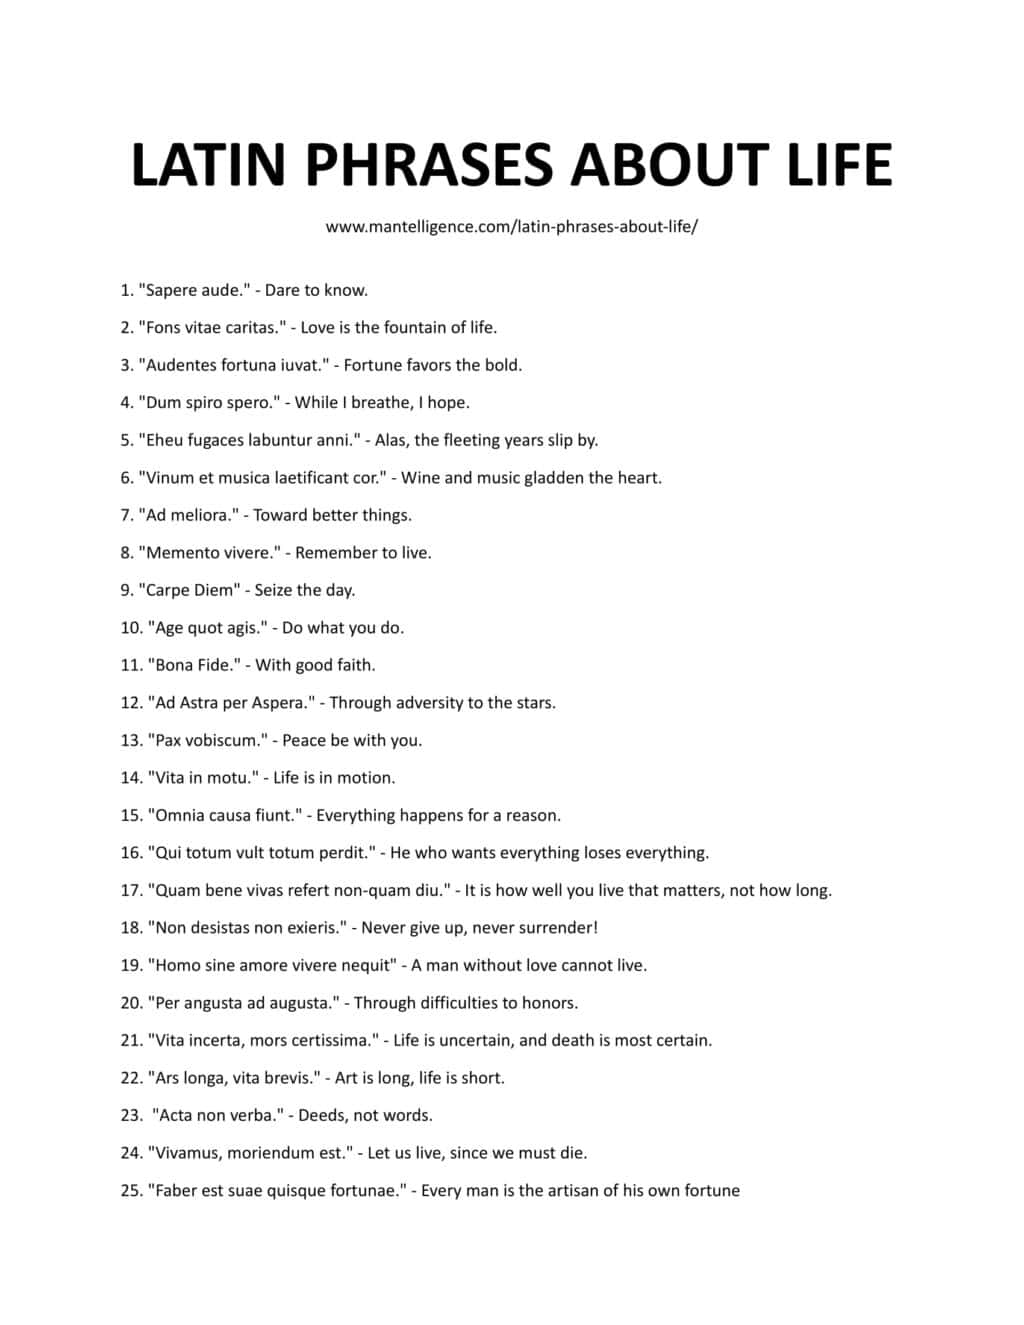 21 Latin Phrases About Life: Best Quotes For A Meaningful Life